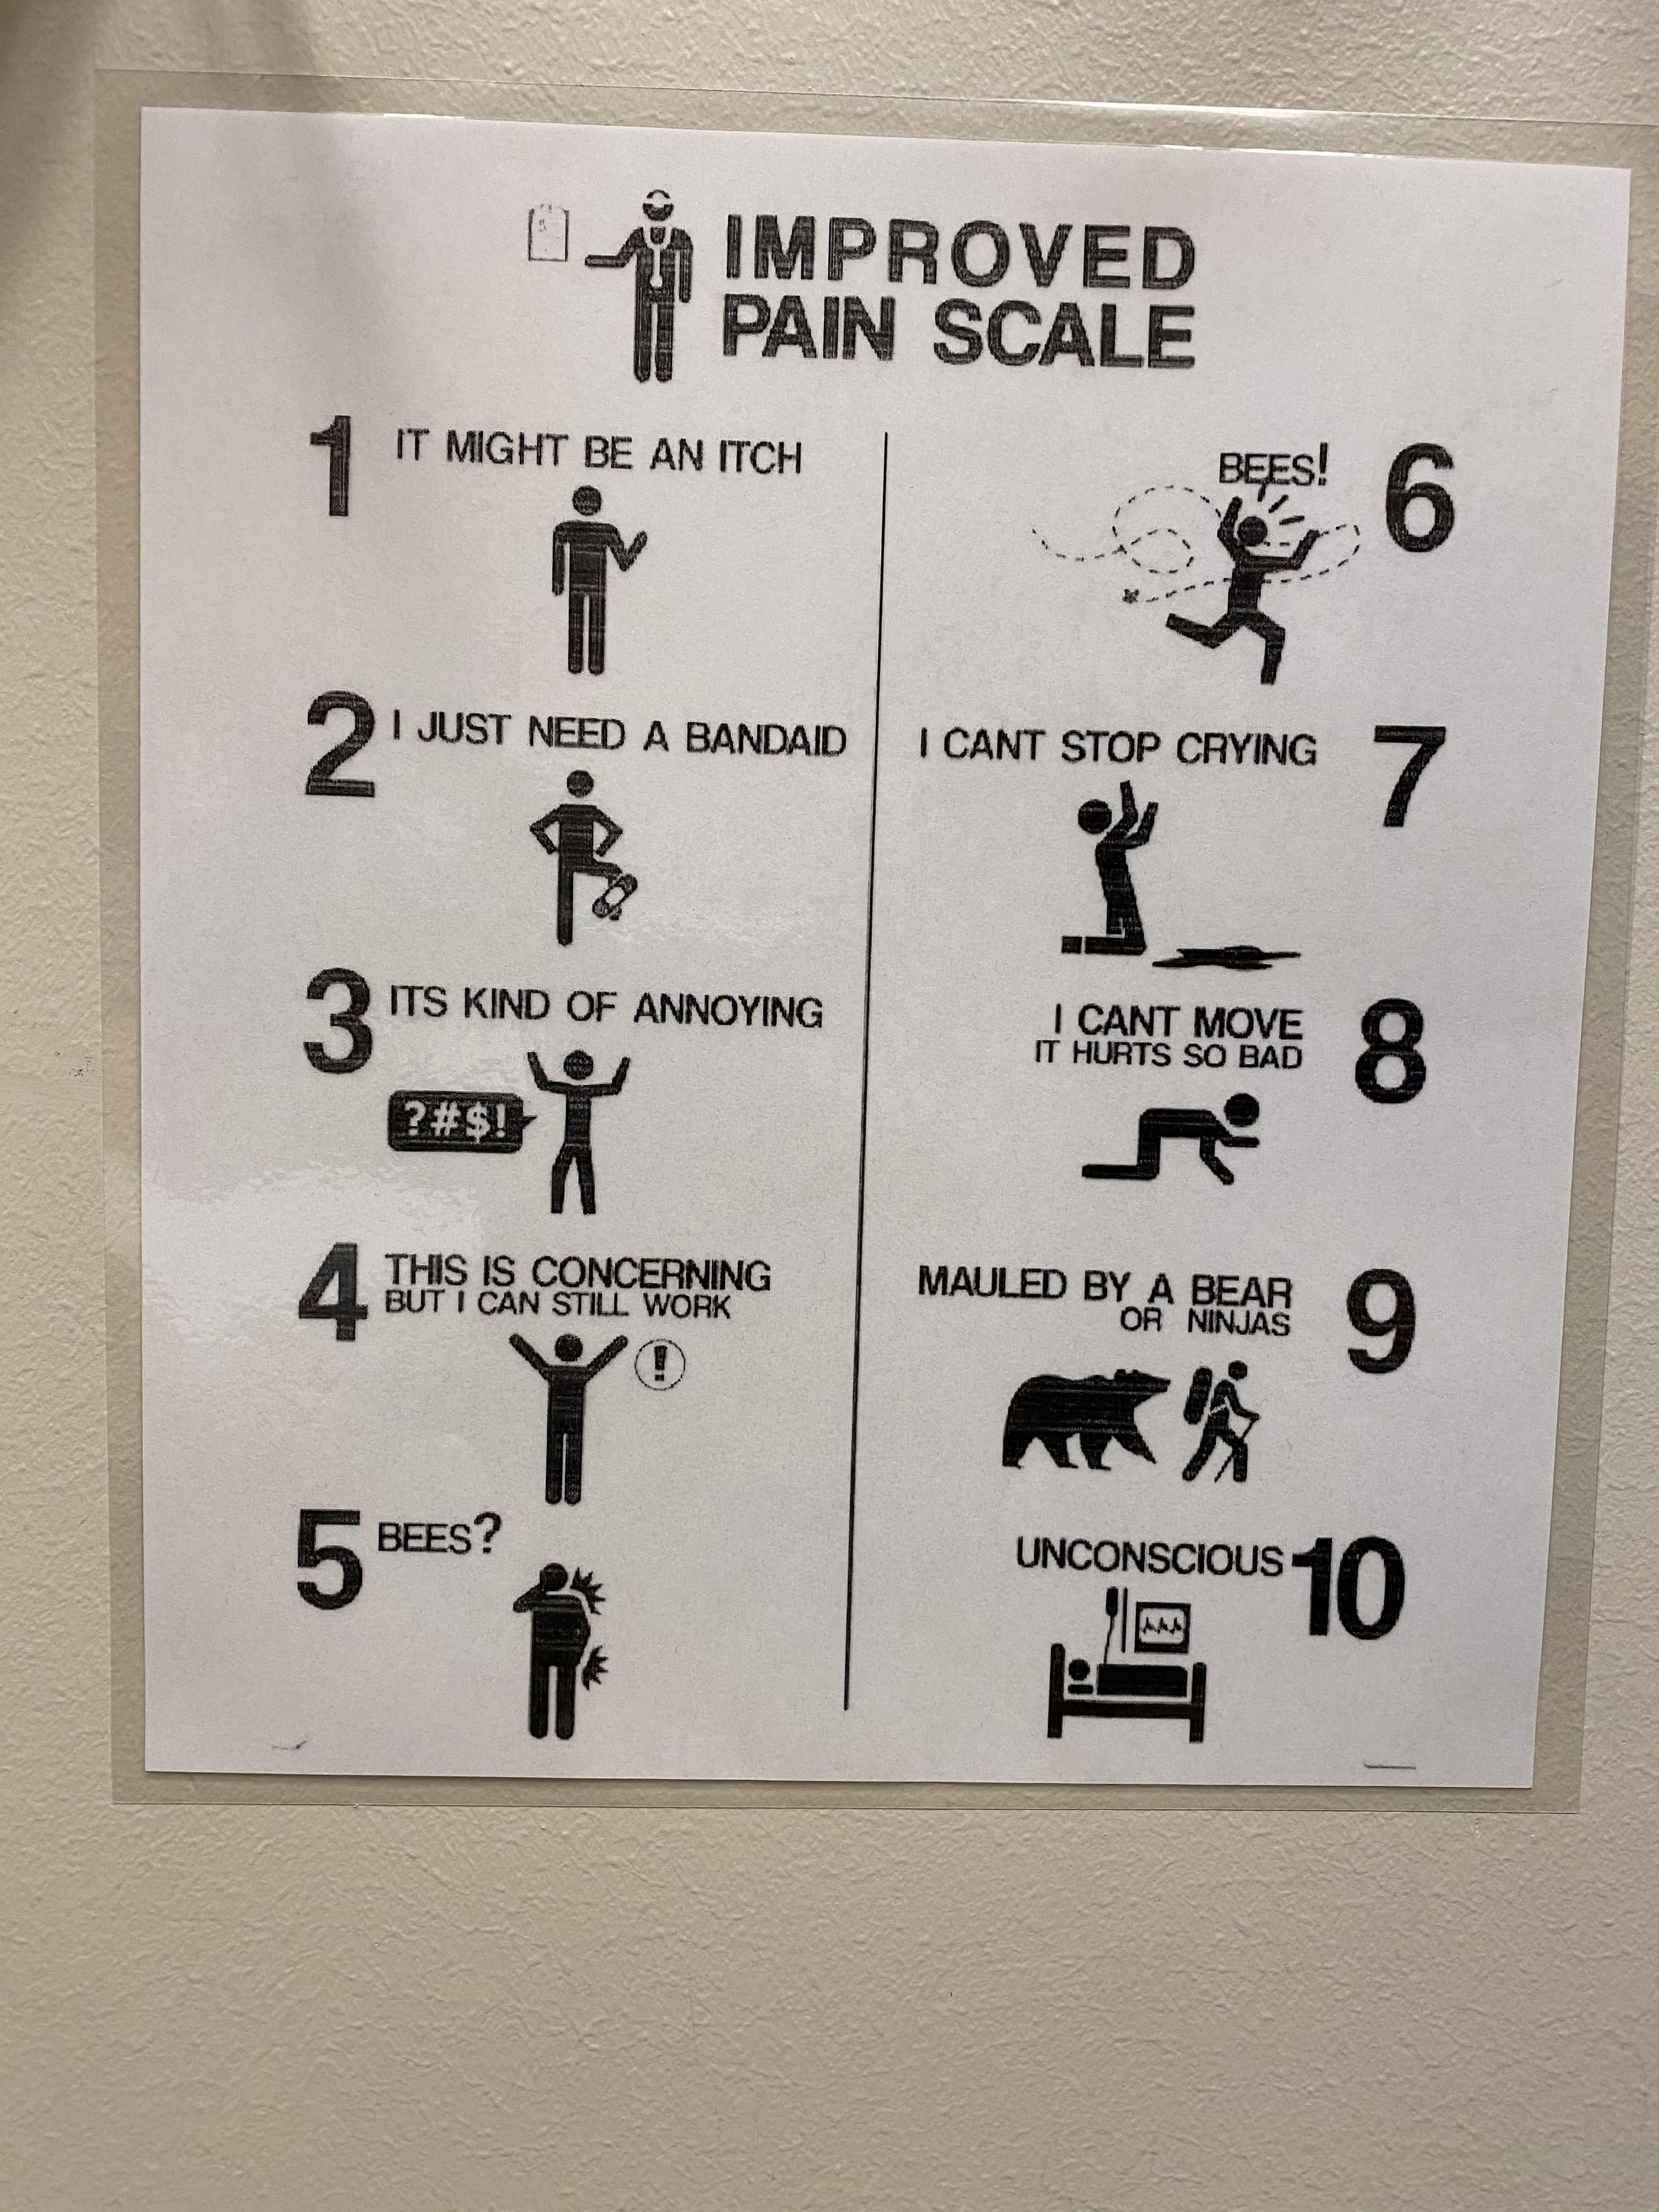 Best pain scale ever. Found at my wife’s doctors office.